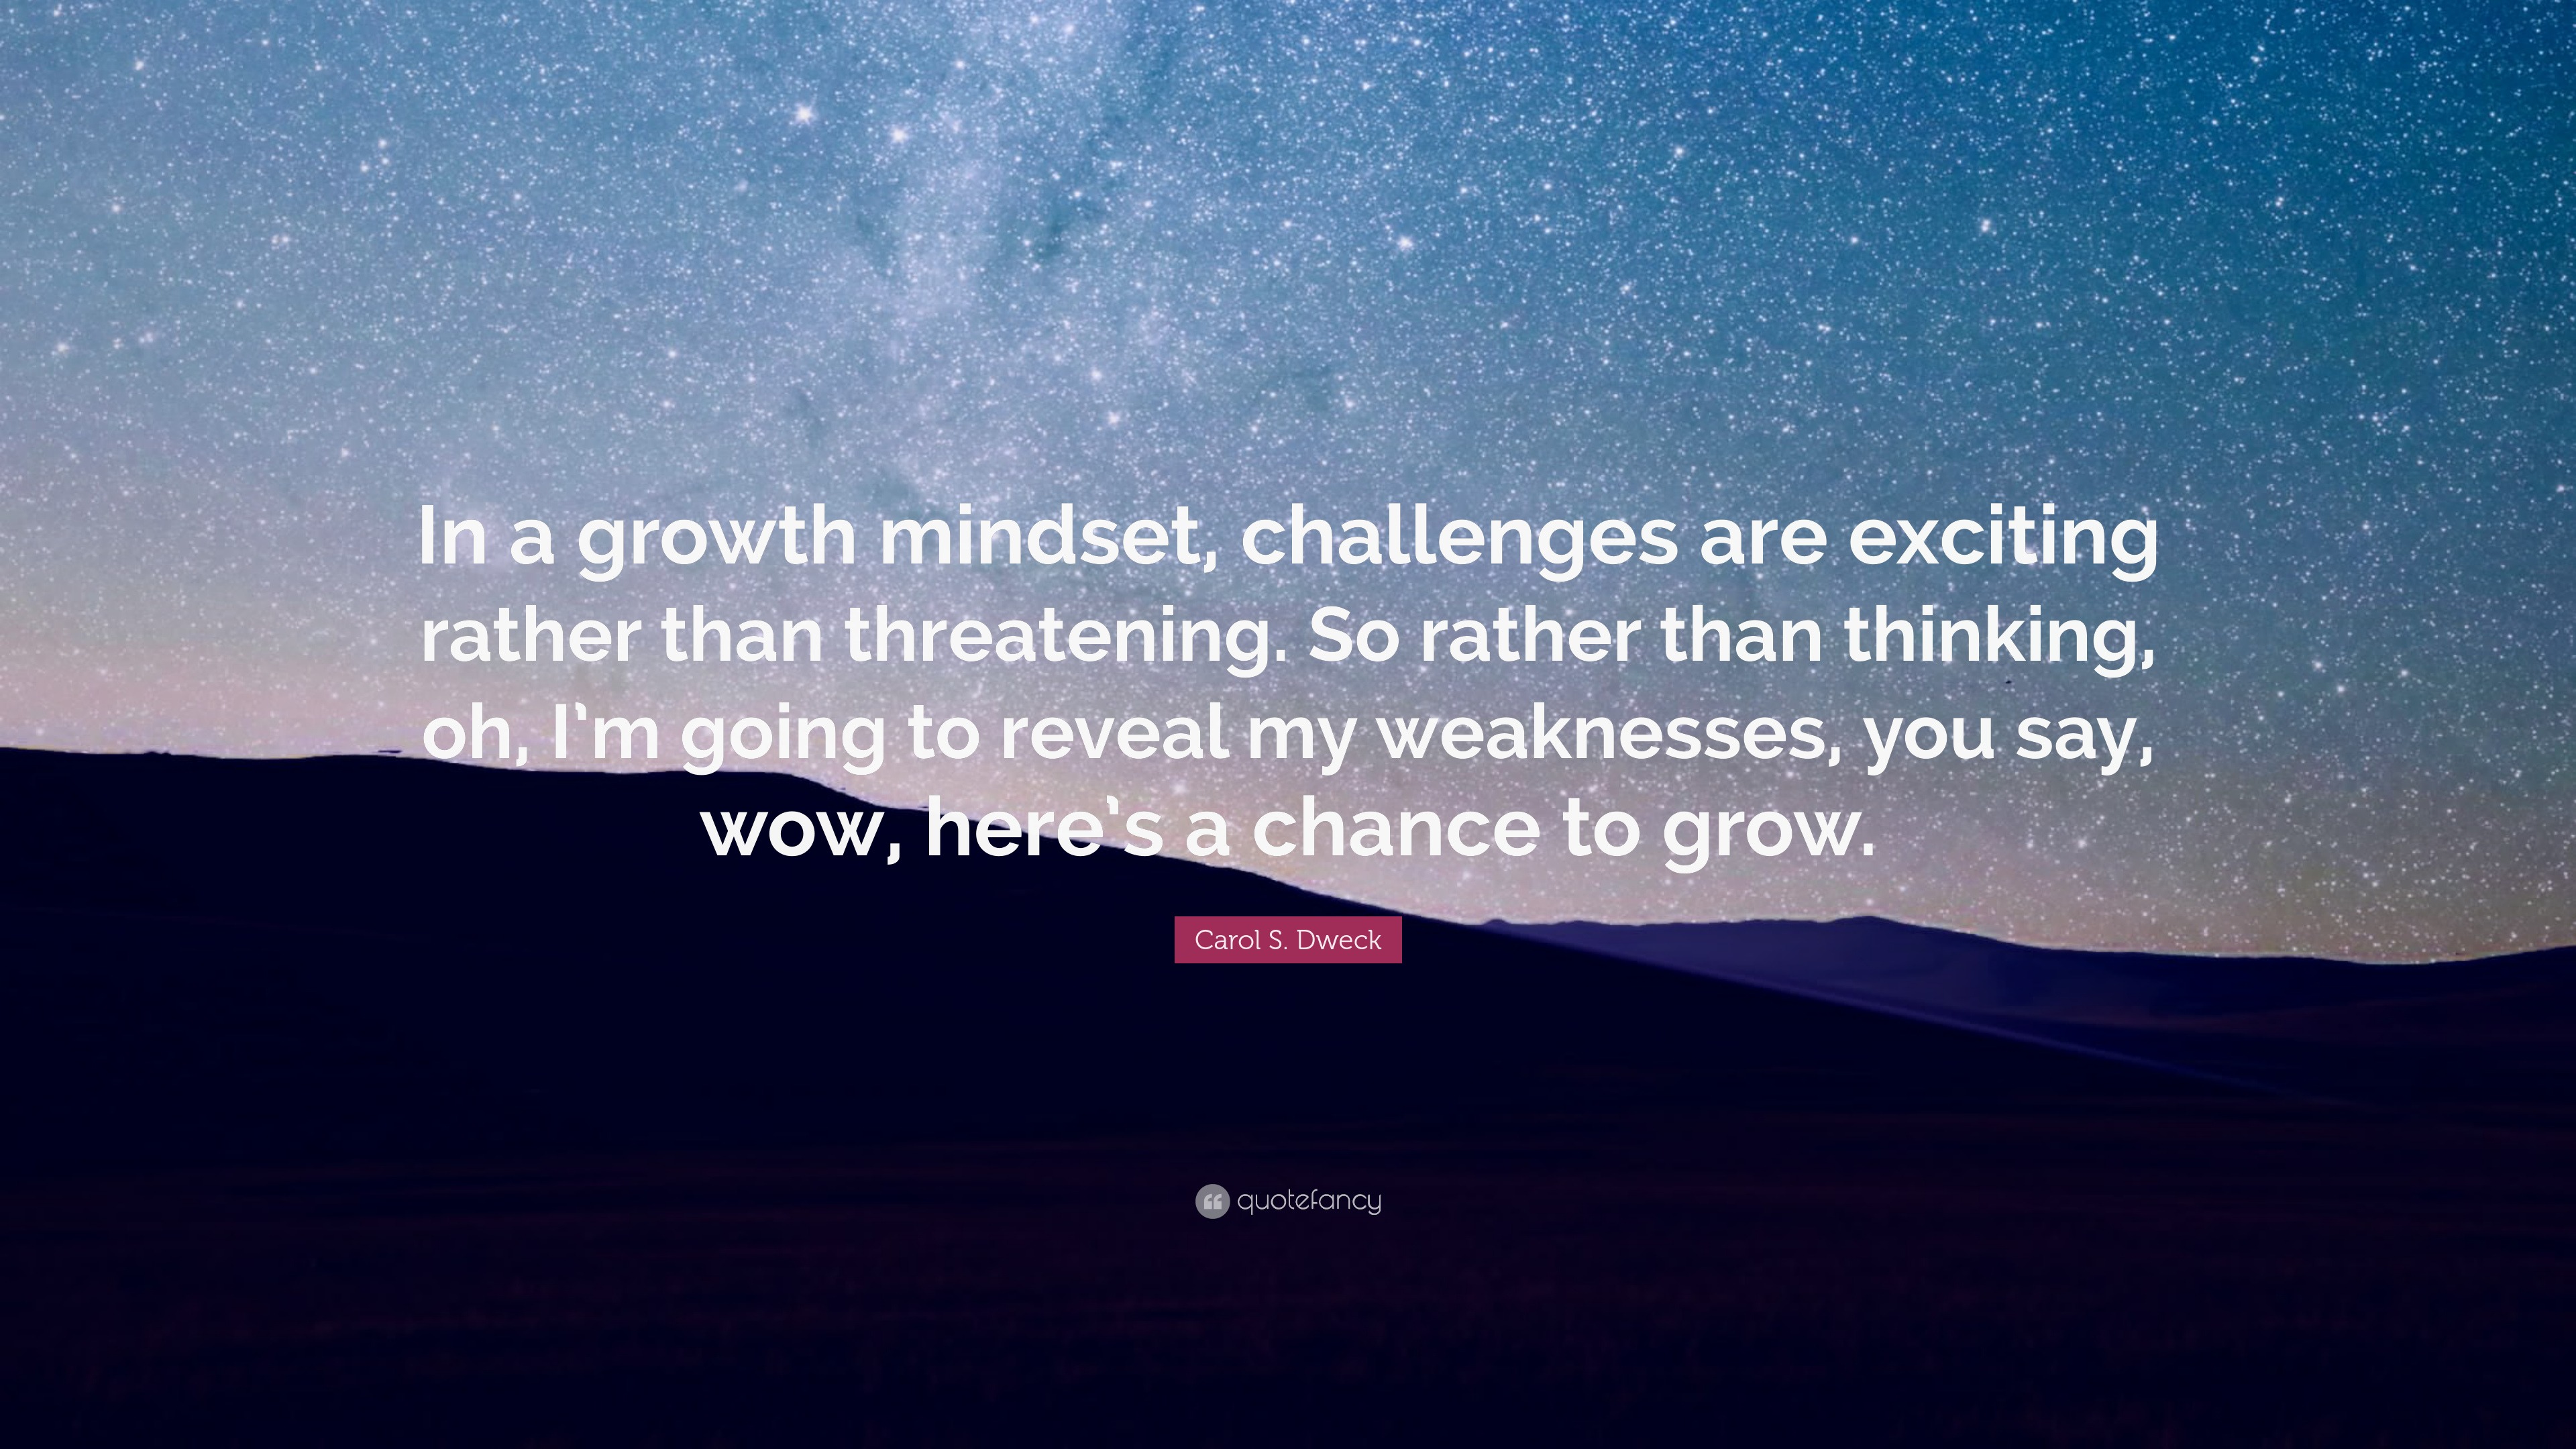 Carol S. Dweck Quote: “In a growth mindset, challenges are exciting